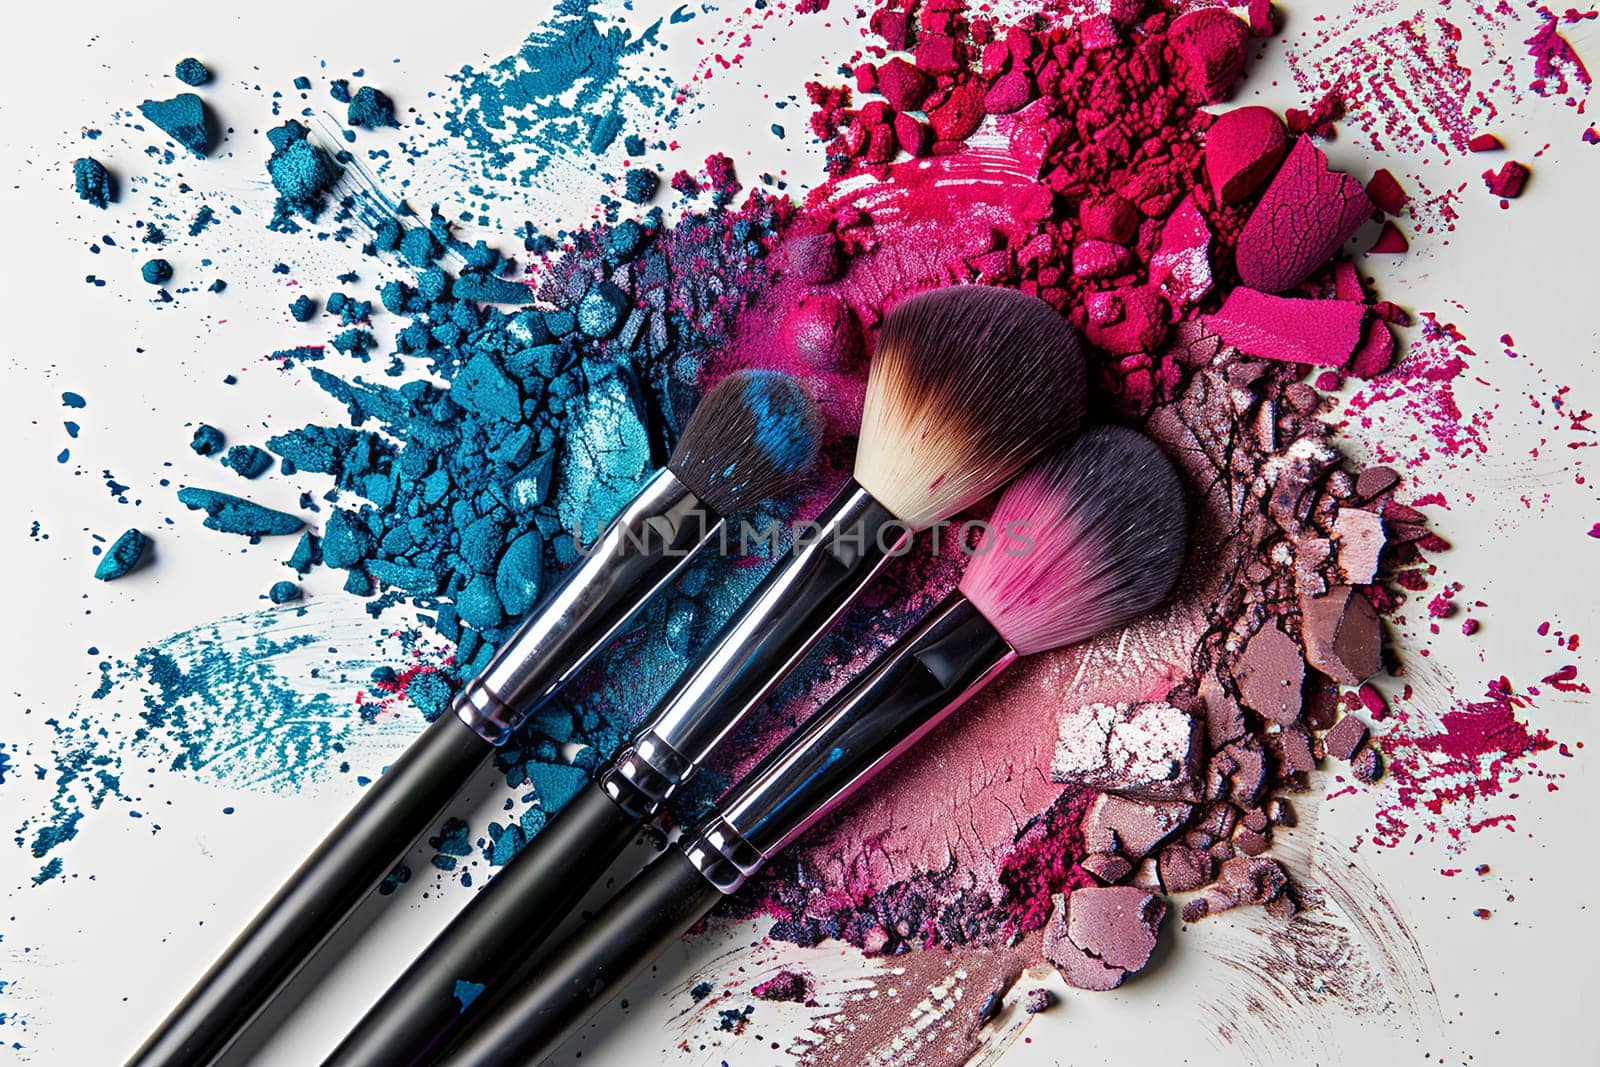 Close-up of makeup brushes covered with colorful eyeshadow and blush on a white background.